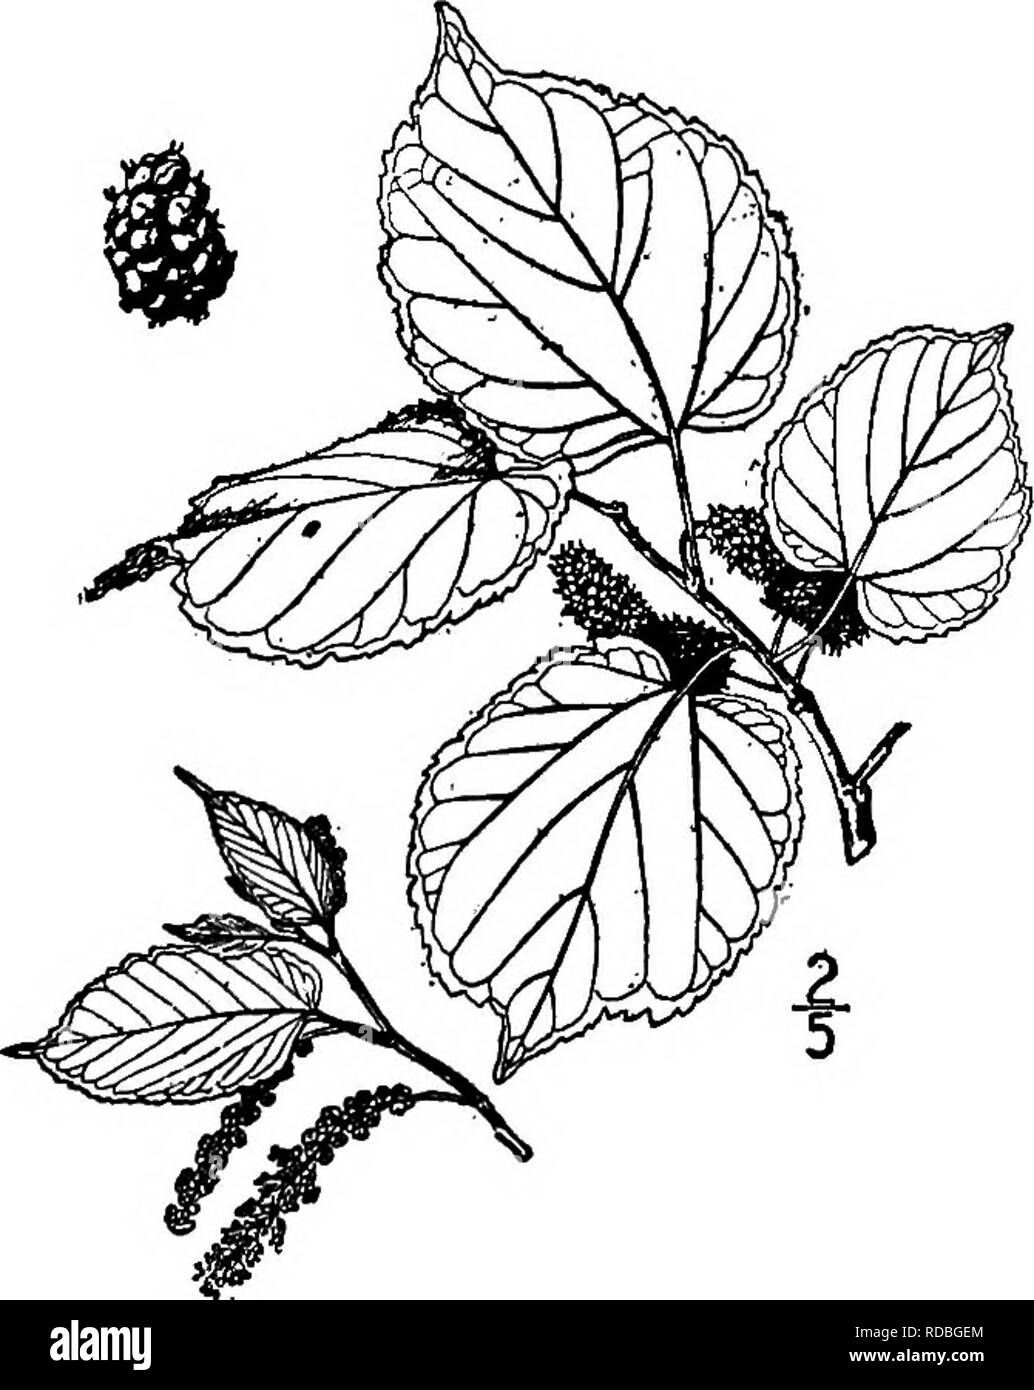 . North American trees : being descriptions and illustrations of the trees growing independently of cultivation in North America, north of Mexico and the West Indies . Trees. Fig. 321. — White Mulberry. 2. BLACK MULBERRY—Moras nigra Linnaeus This tree is supposed to have come originally from Persia, but has been known in Europe for ages and is now widely naturalized there. In our area it has been introduced on account of its pleasant black fruit, and has become naturalized along roadsides and waste places in the southern States and also on the Pacific coast, at- taining a maximum height of 20  Stock Photo